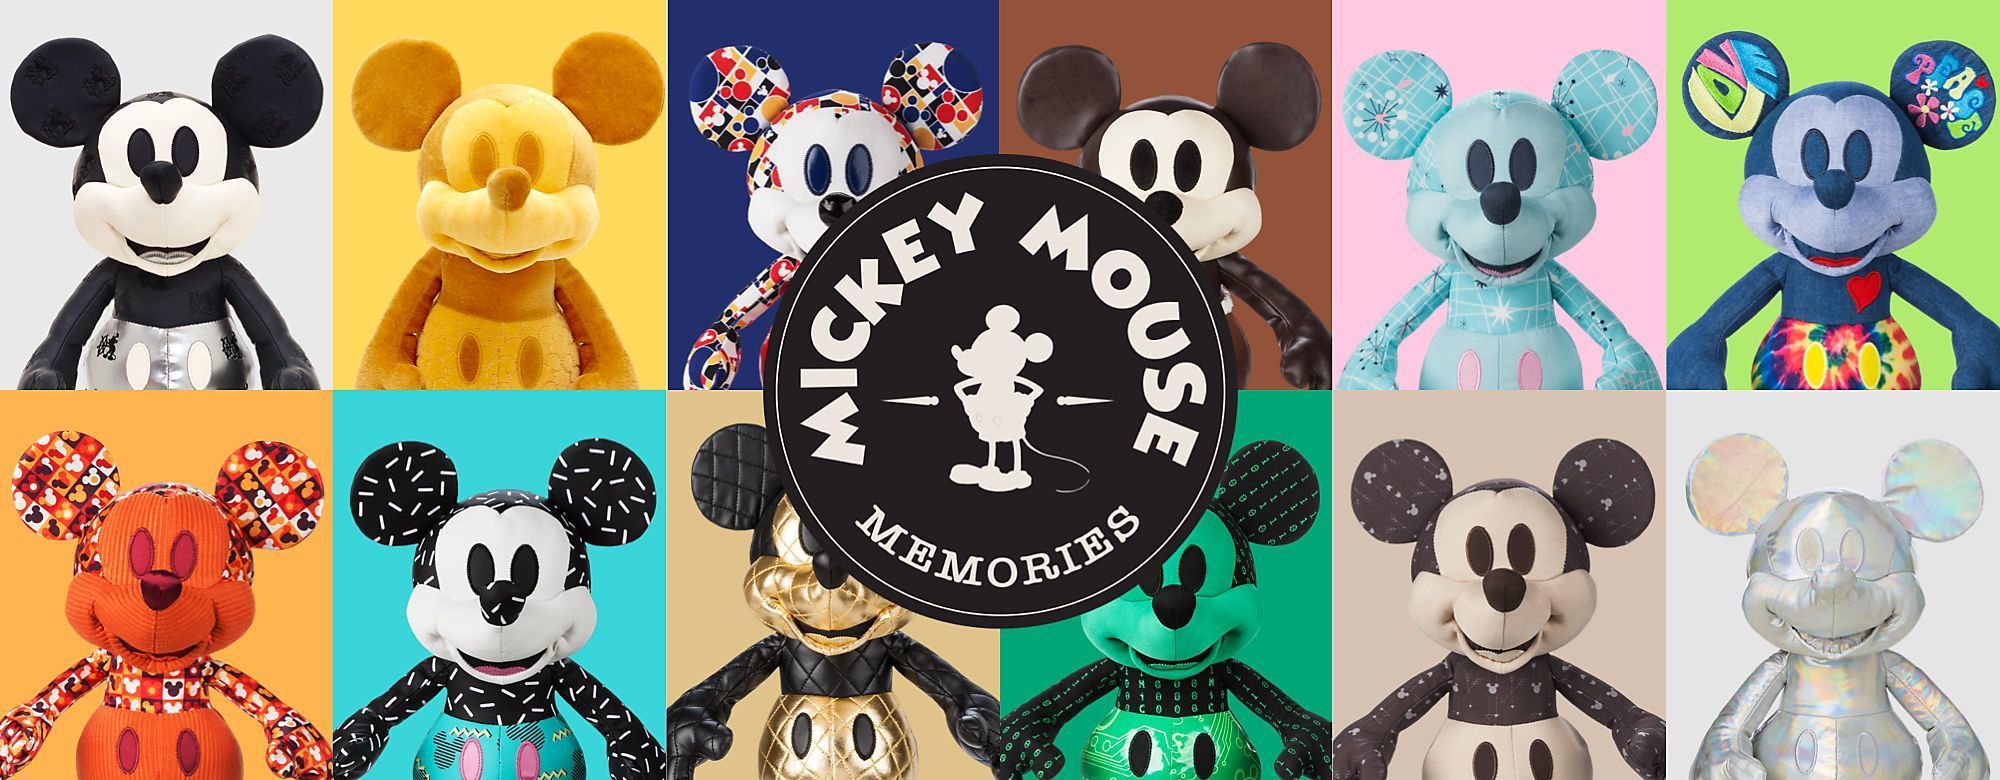 Shop now for Mickey Mouse Memories Soft Toys at shopDisney